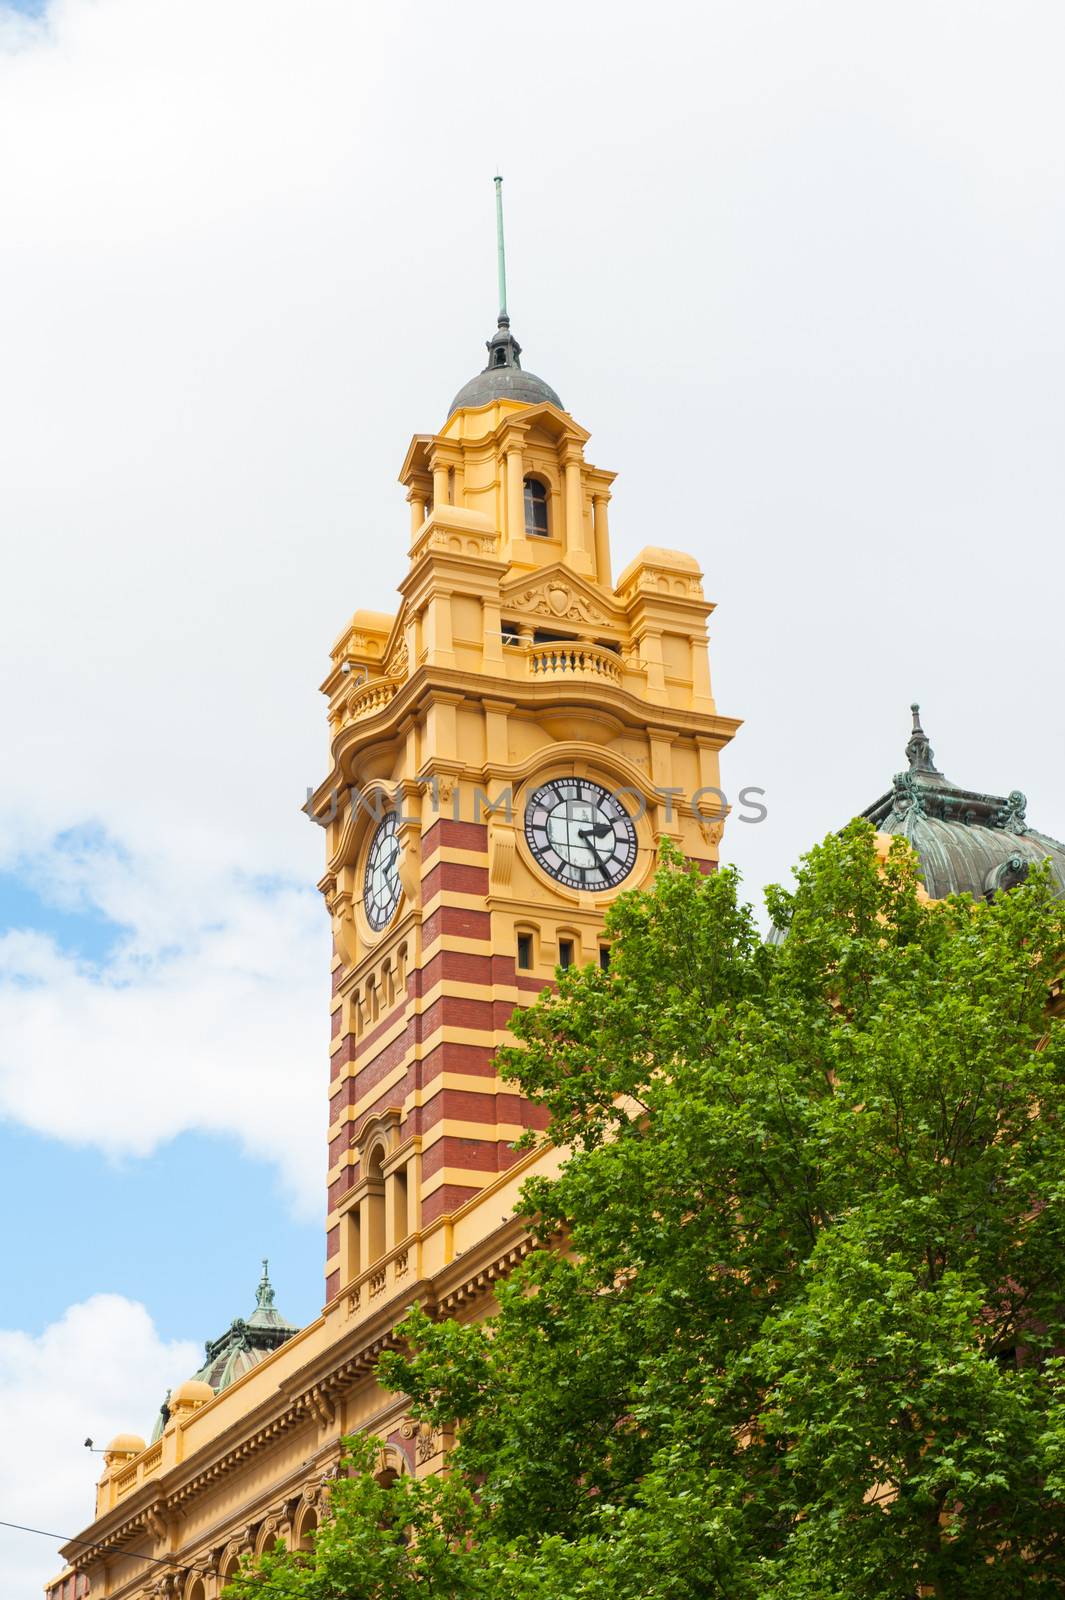 Flinders Street Station by fyletto